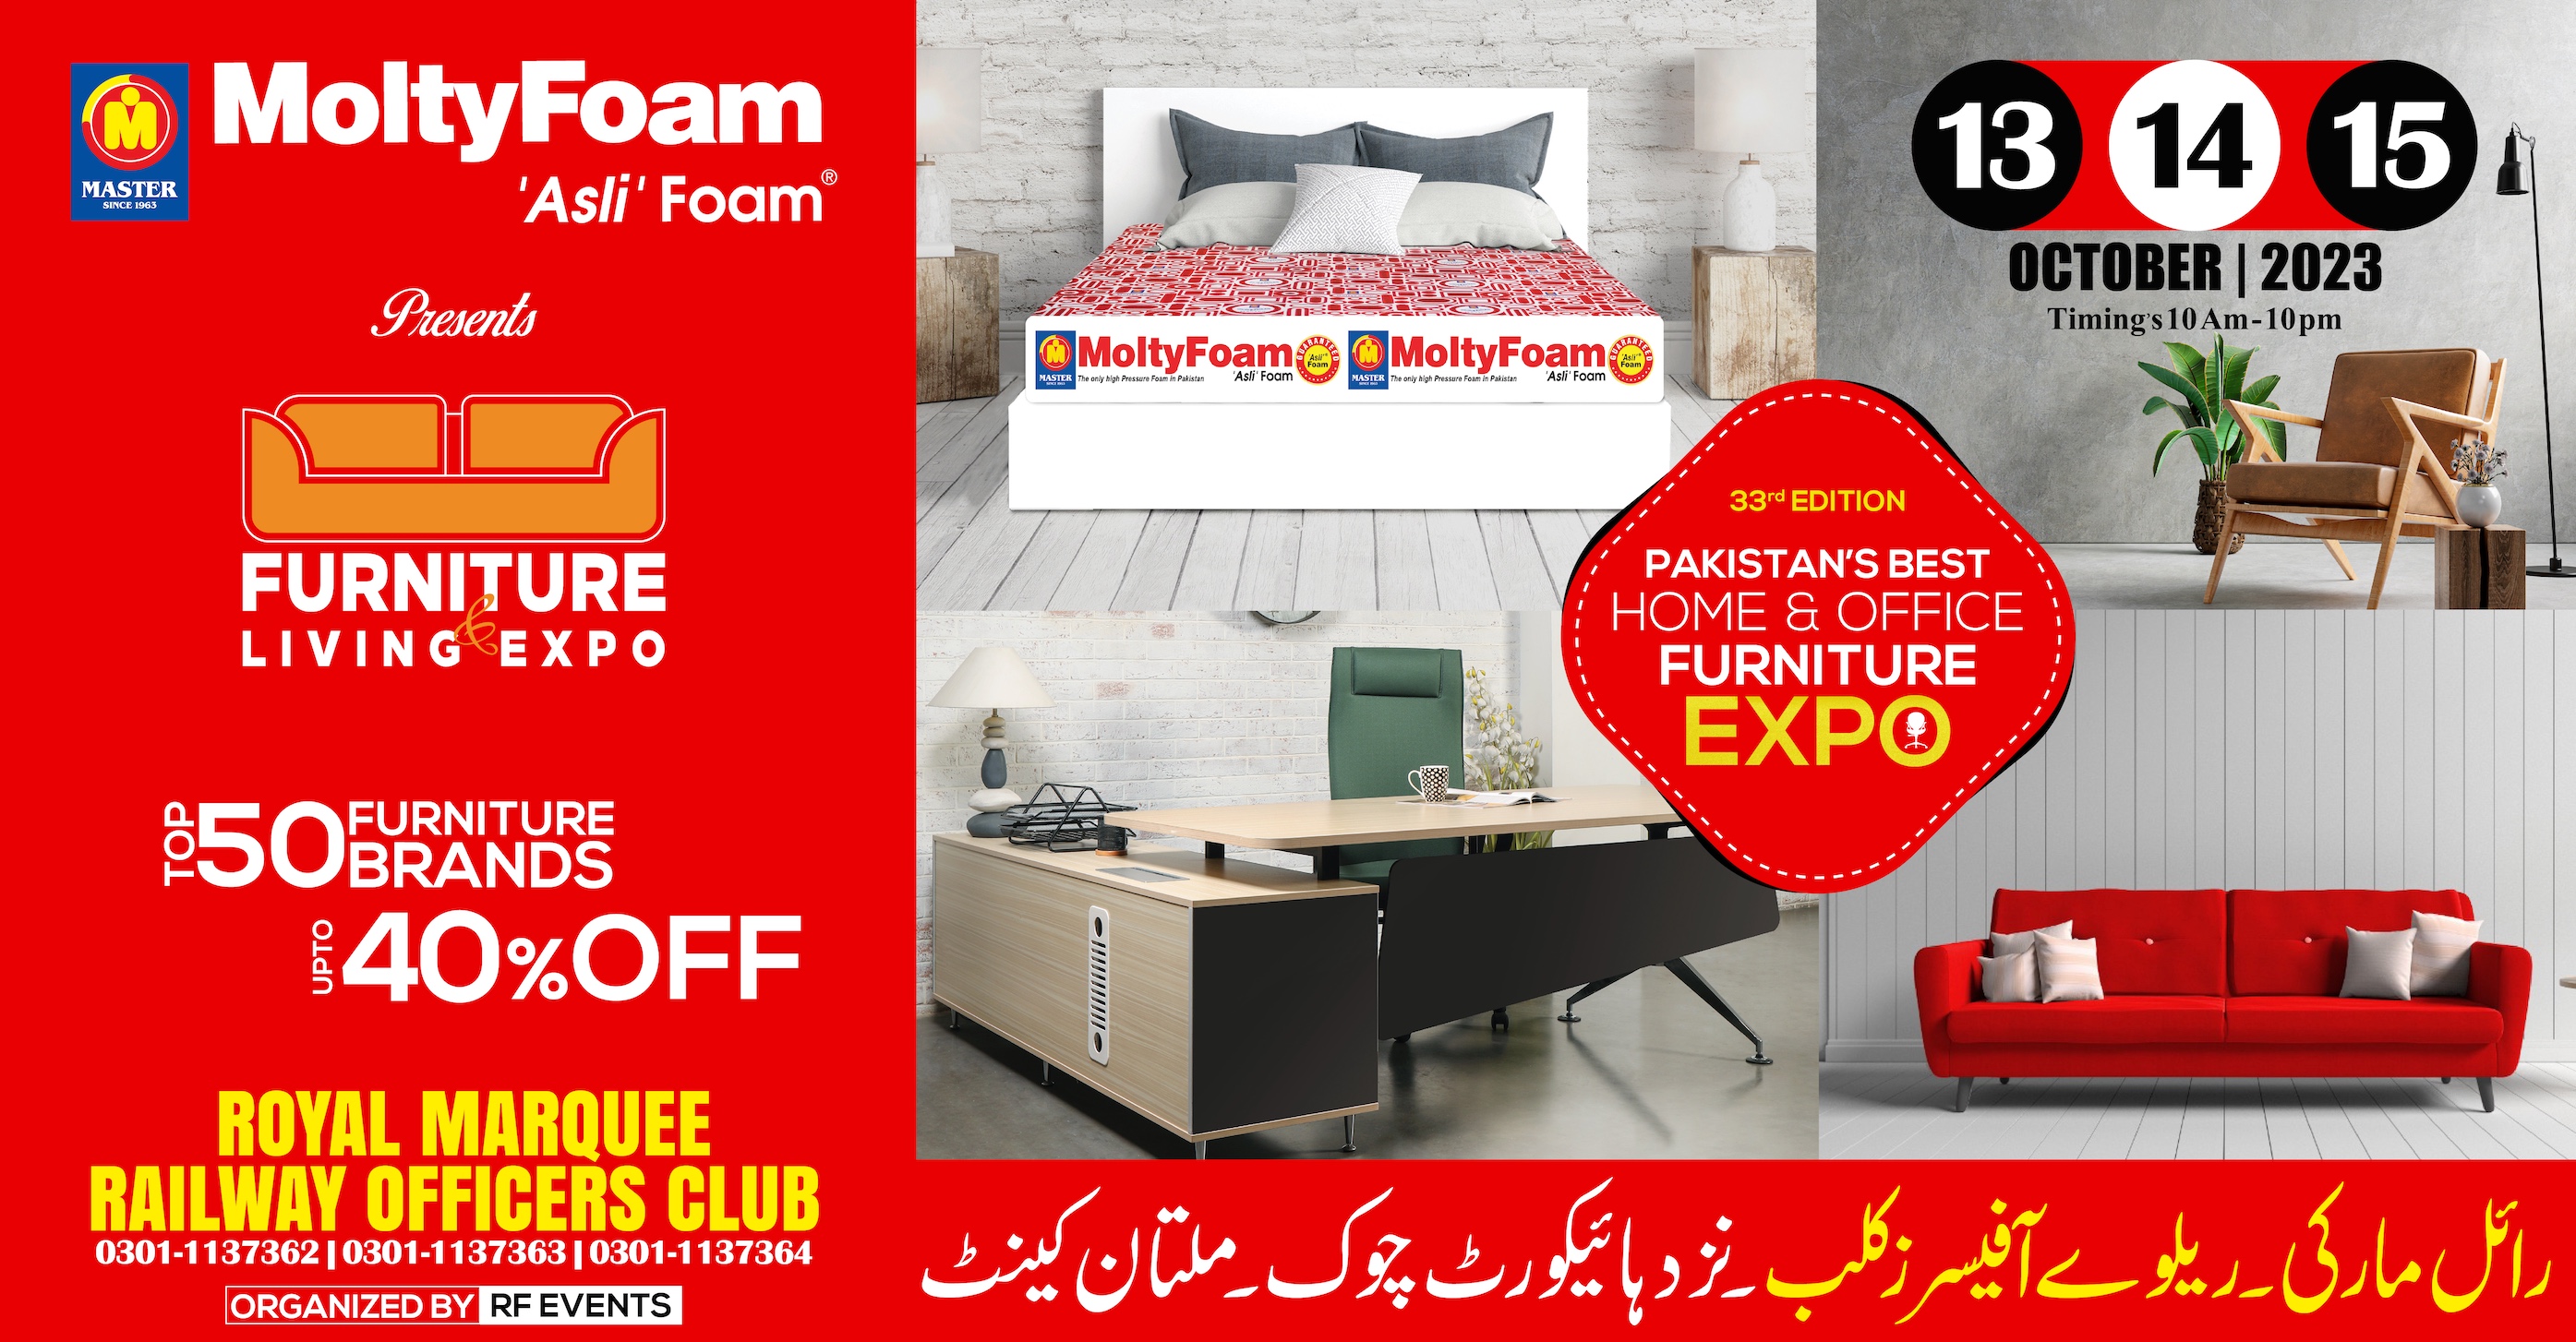 Multan Furniture and Living Expo on 13-14-15 October 2023 at Royal Marquee, Railway Officers Club, Multan, Punjab, Pakistan